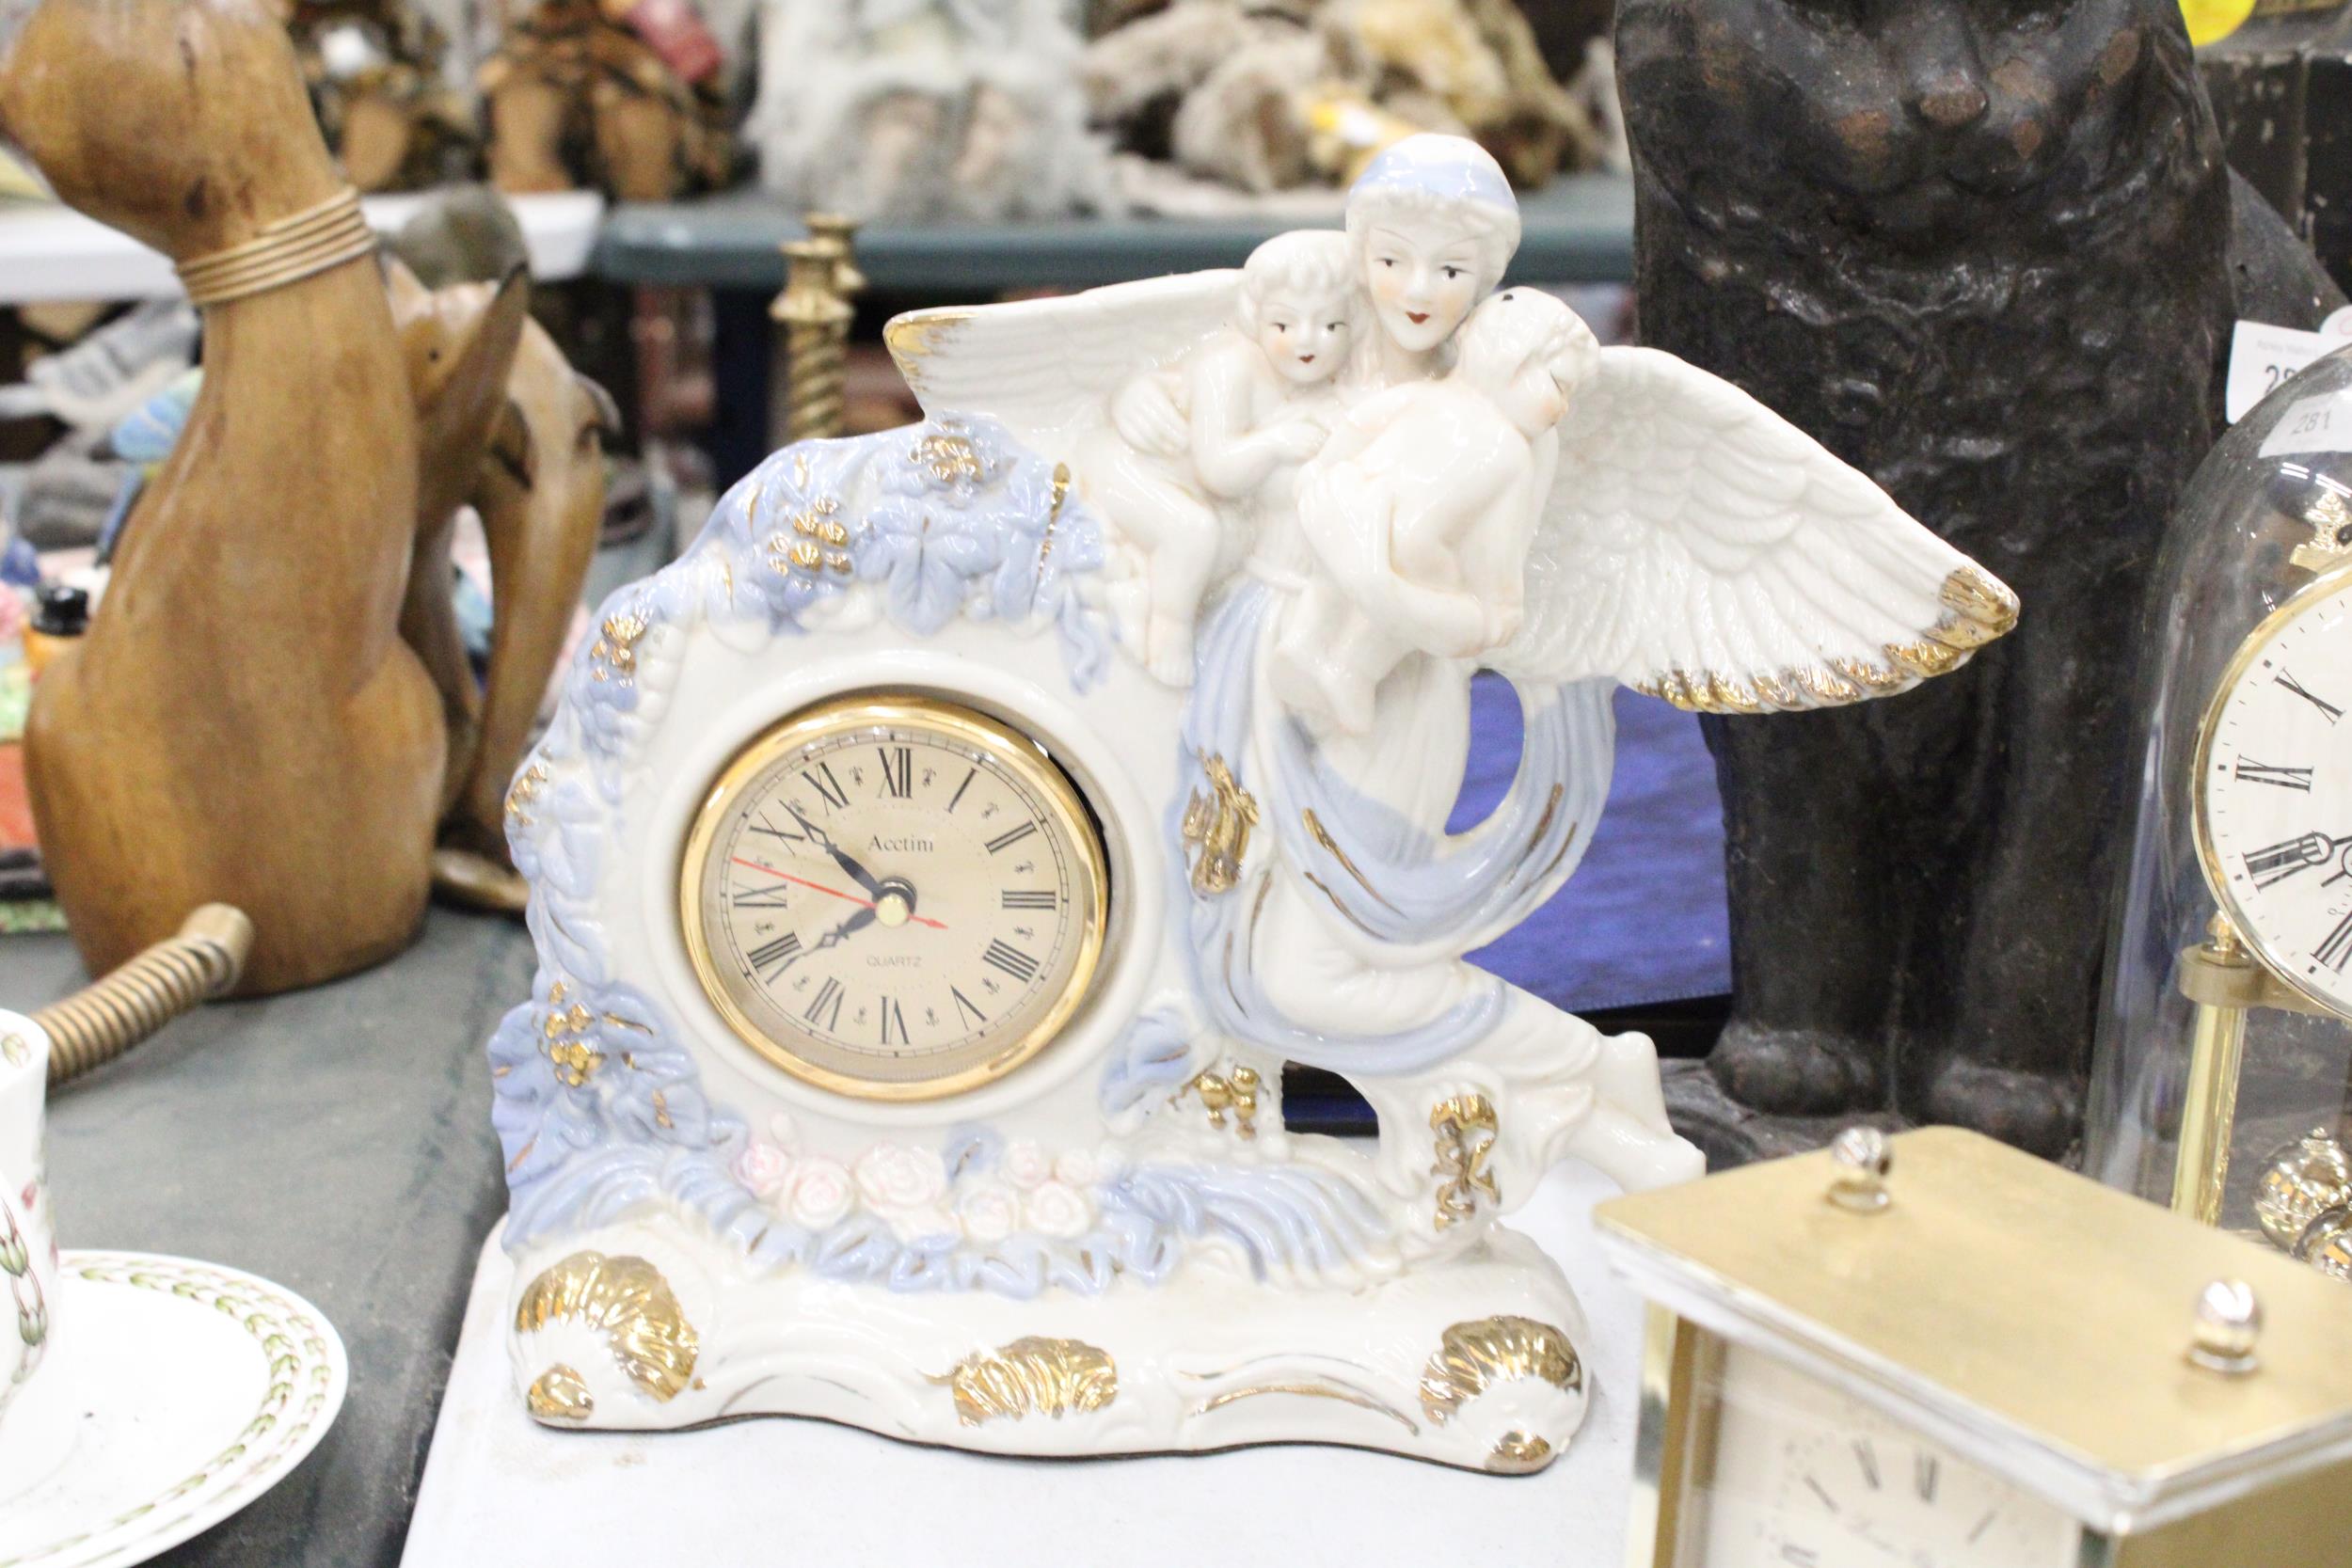 TWO MANTLE CLOCKS TO INCLUDE A CERAMIC ANGEL WITH CHILDREN, PLUS A CARRIAGE CLOCK - Image 3 of 5